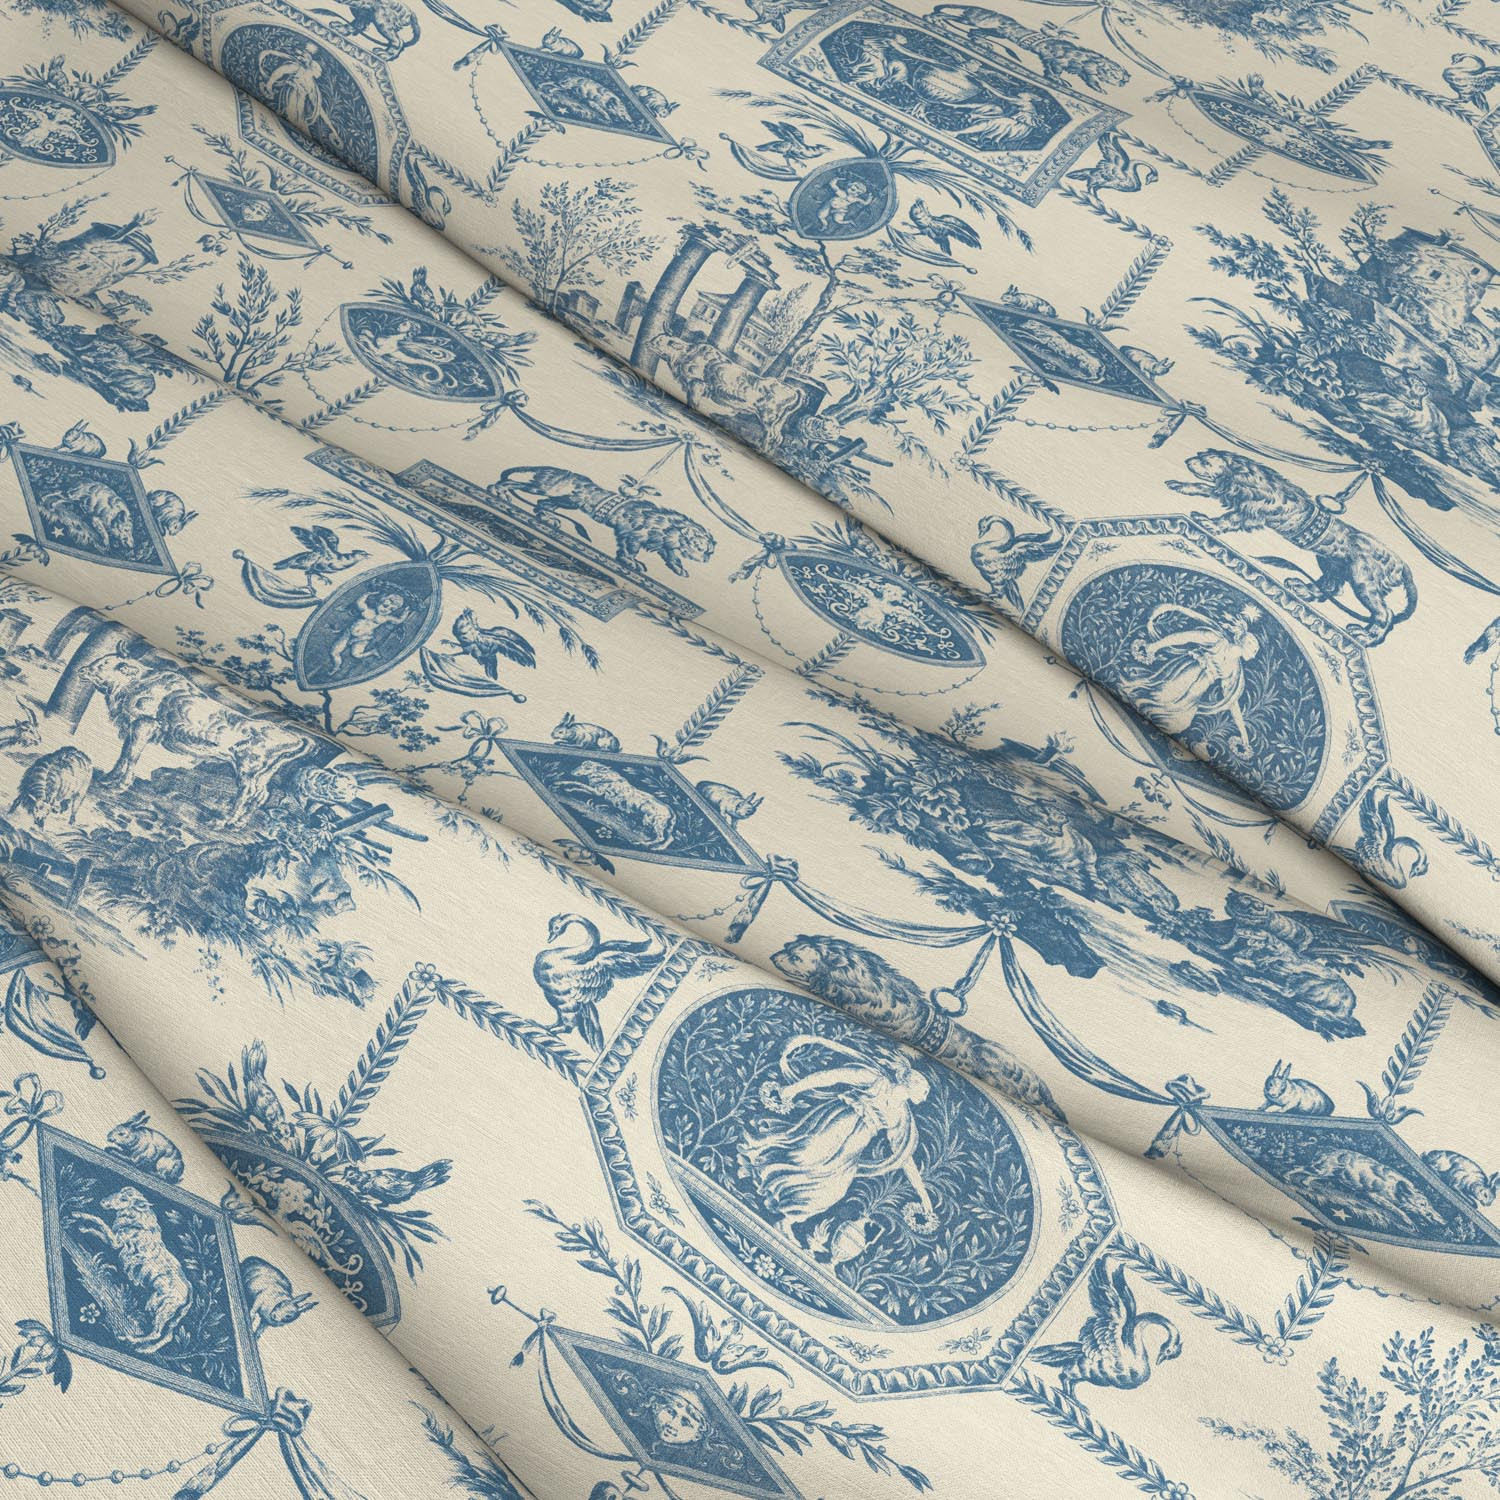 Lion Toile Navy Linen Mix Fabric | Warner House